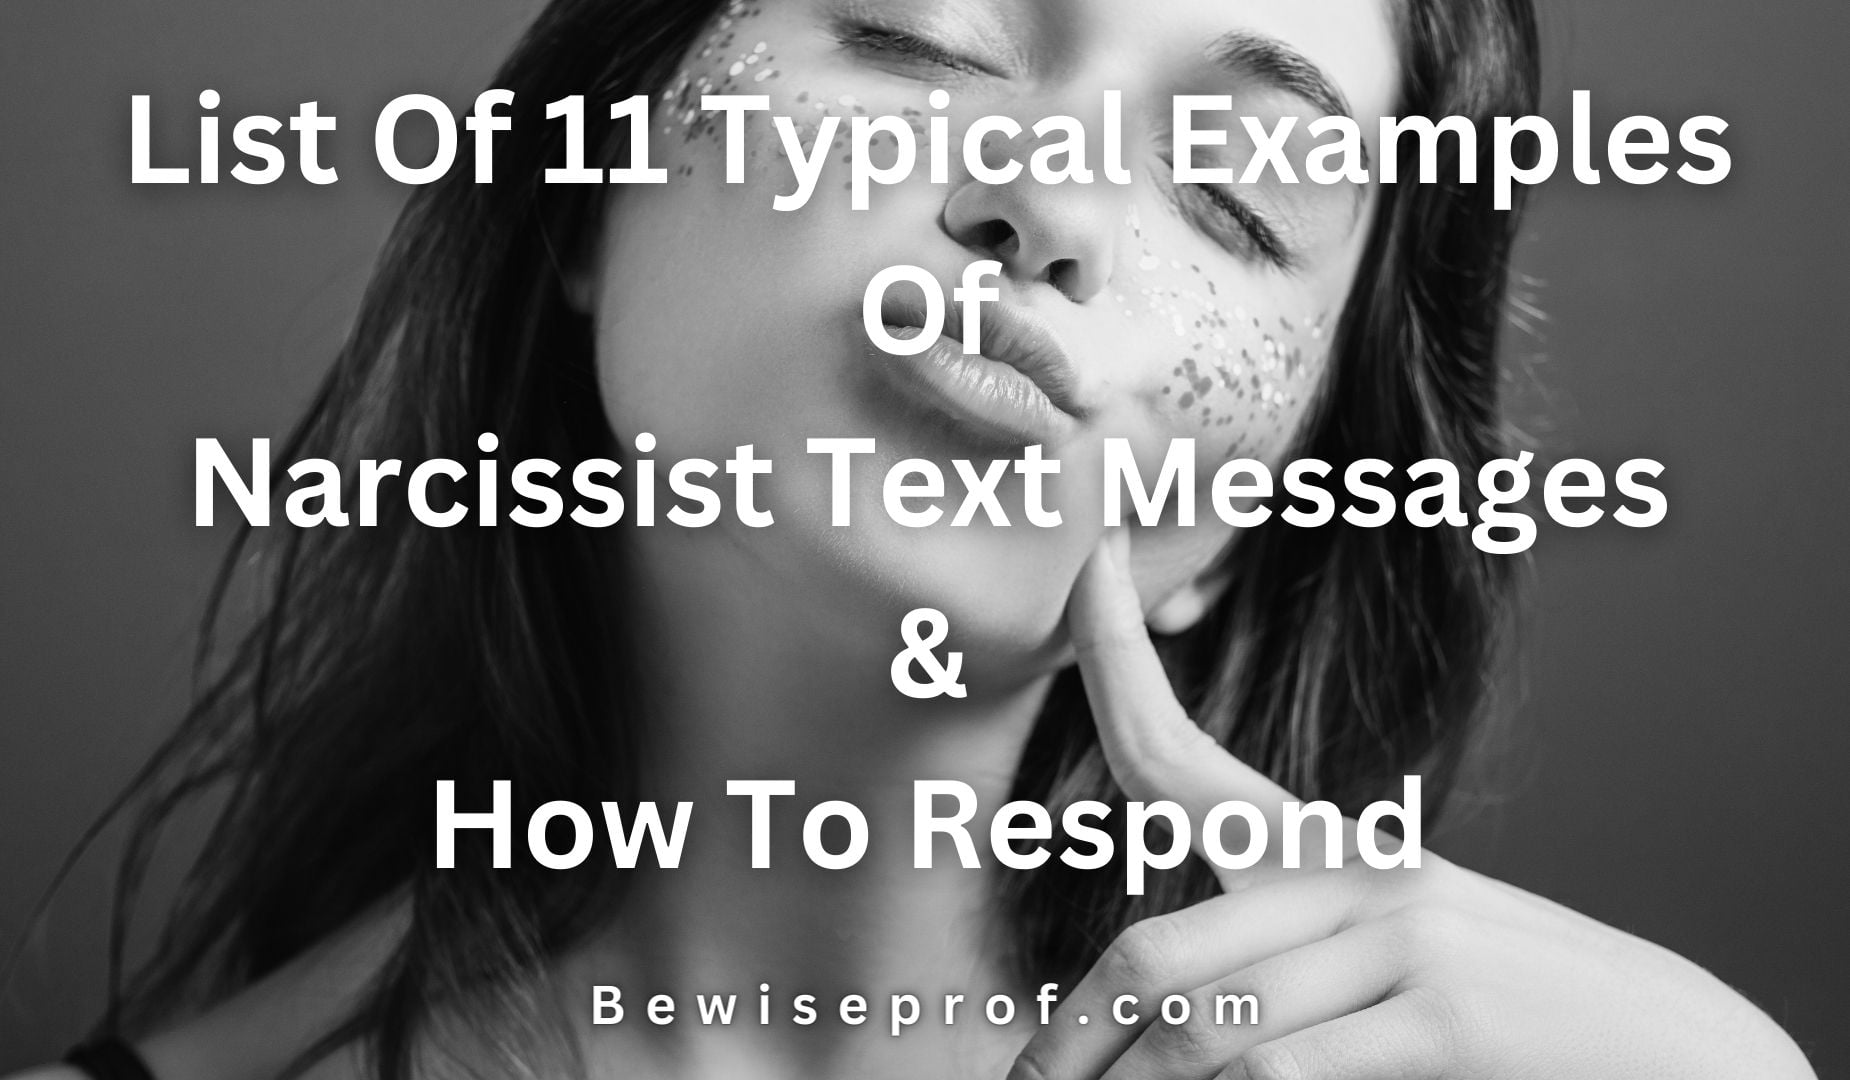 List Of 11 Typical Examples Of Narcissist Text Messages